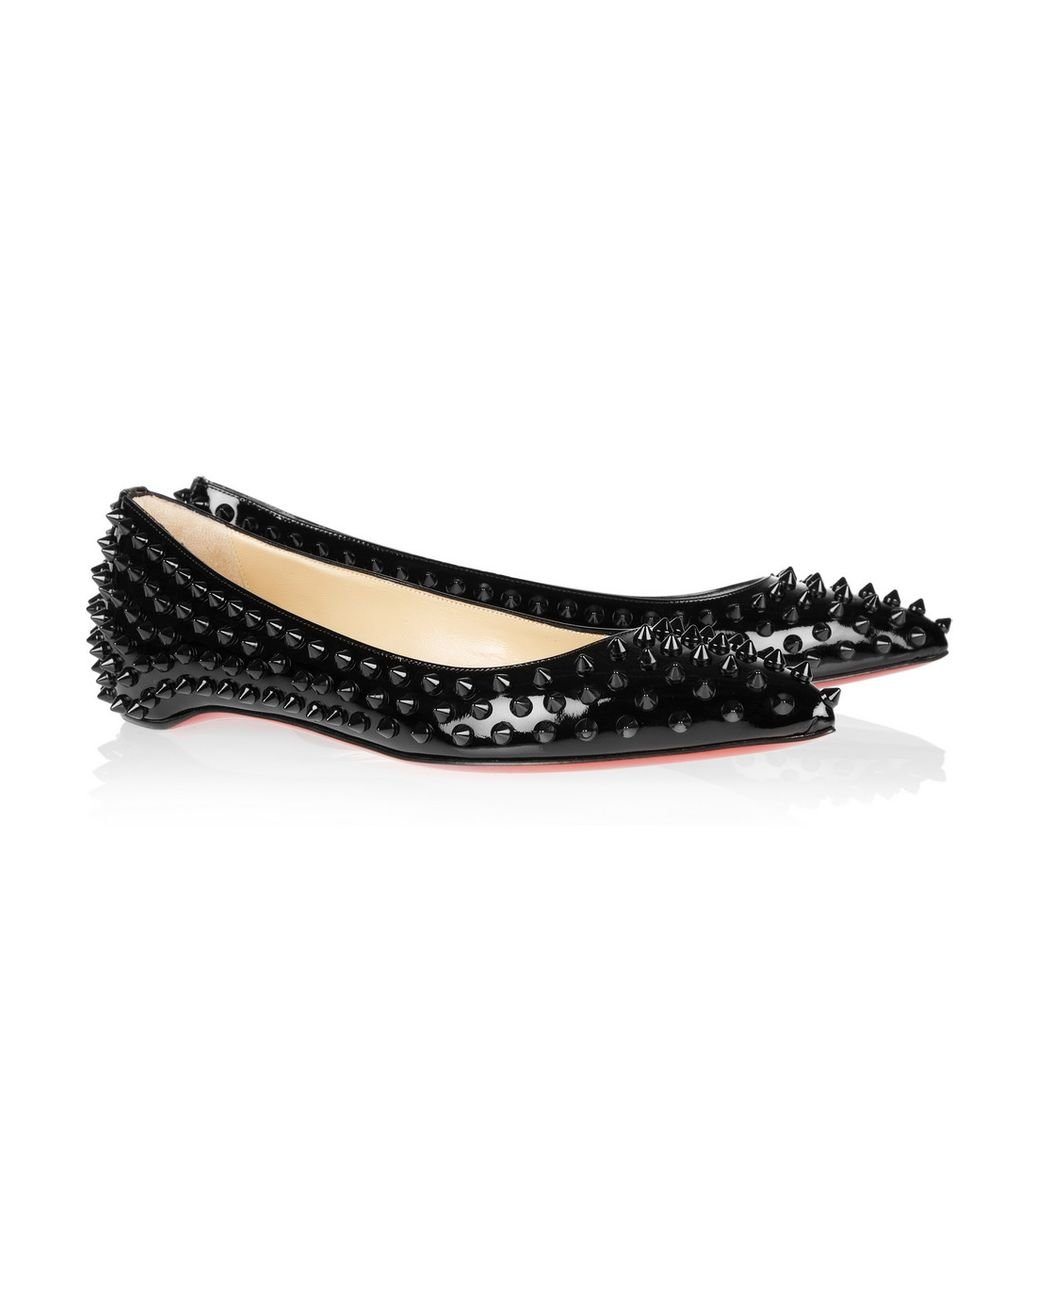 Christian Louboutin Pigalle Spikes Flat in Black   Lyst